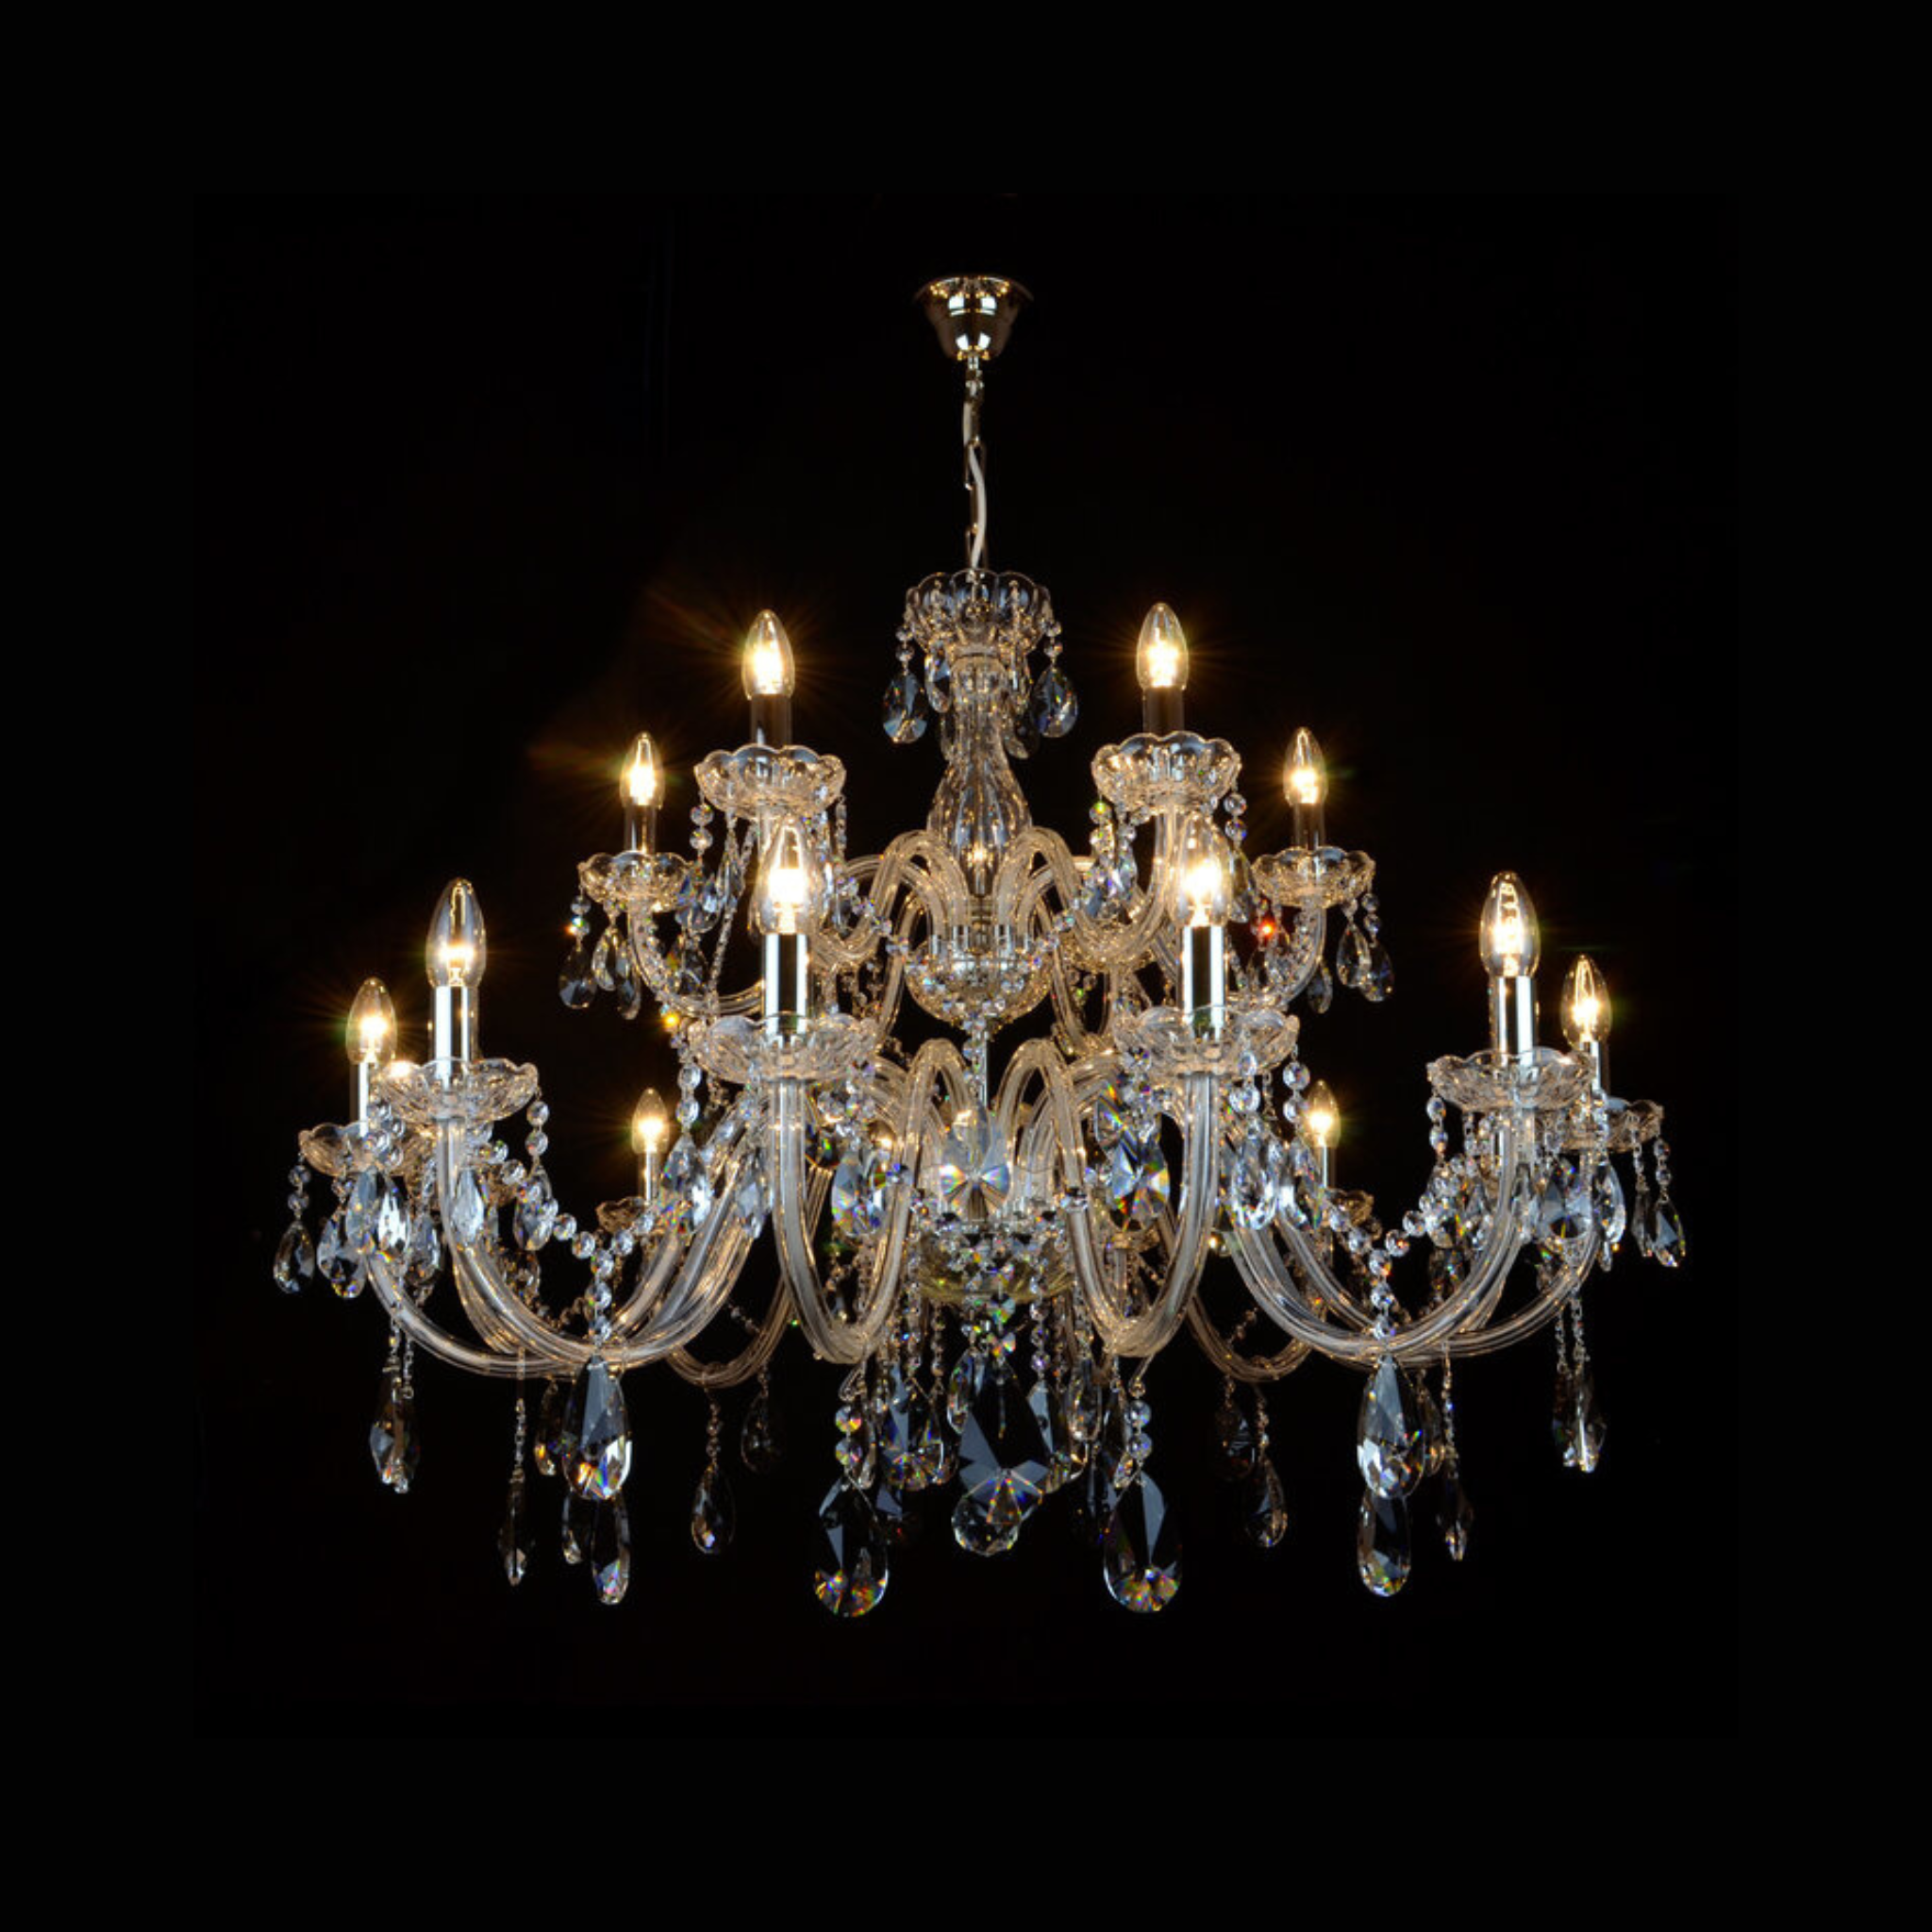 Clarit 18 Crystal Glass Chandelier - Wranovsky - Luxury Lighting Boutique